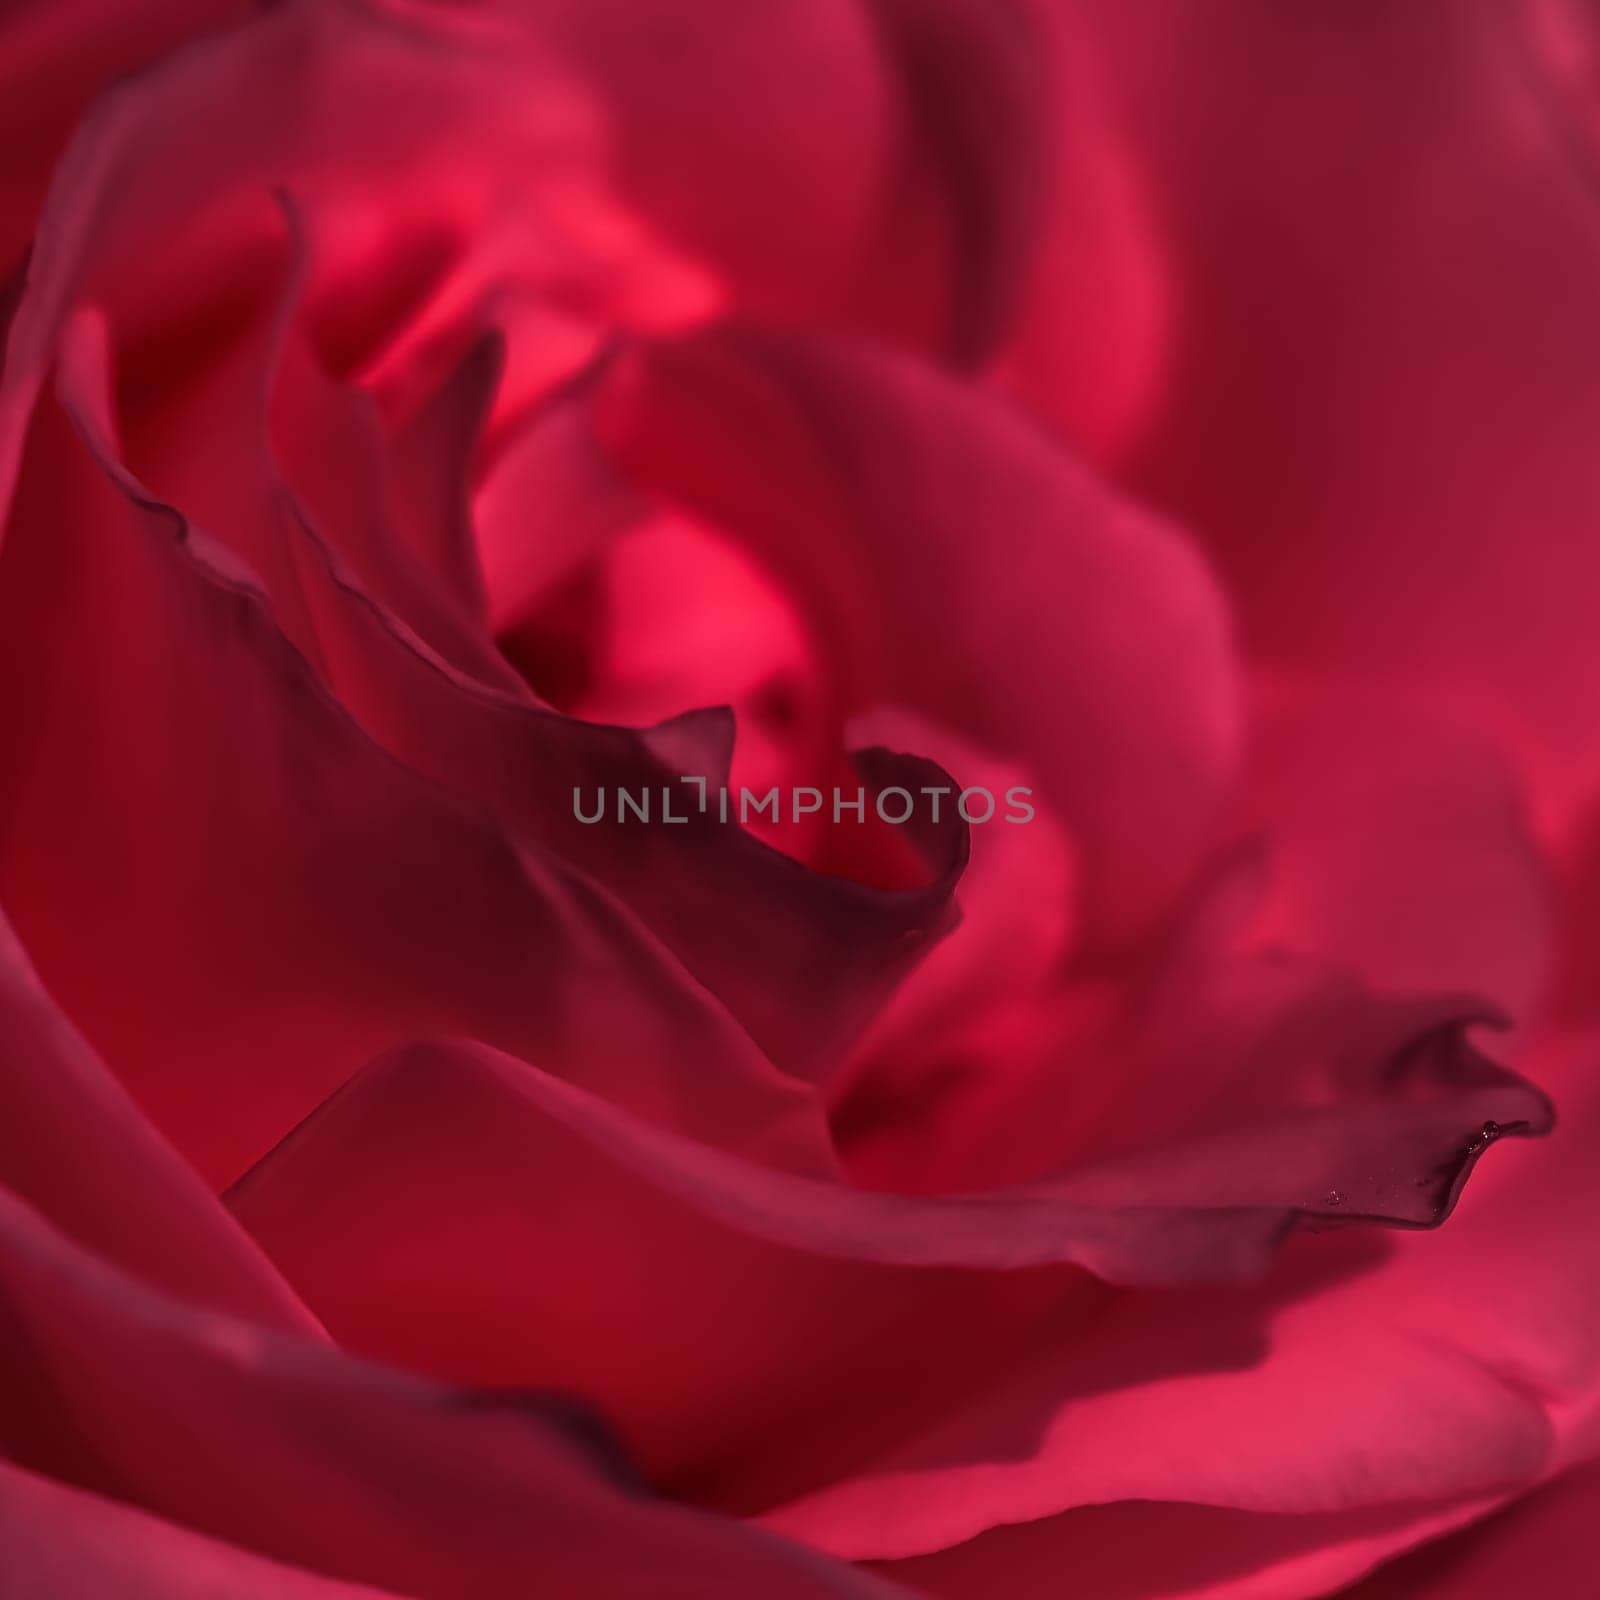 Red rose flower petals. Soft focus, abstract floral background. Macro flowers backdrop for holiday design